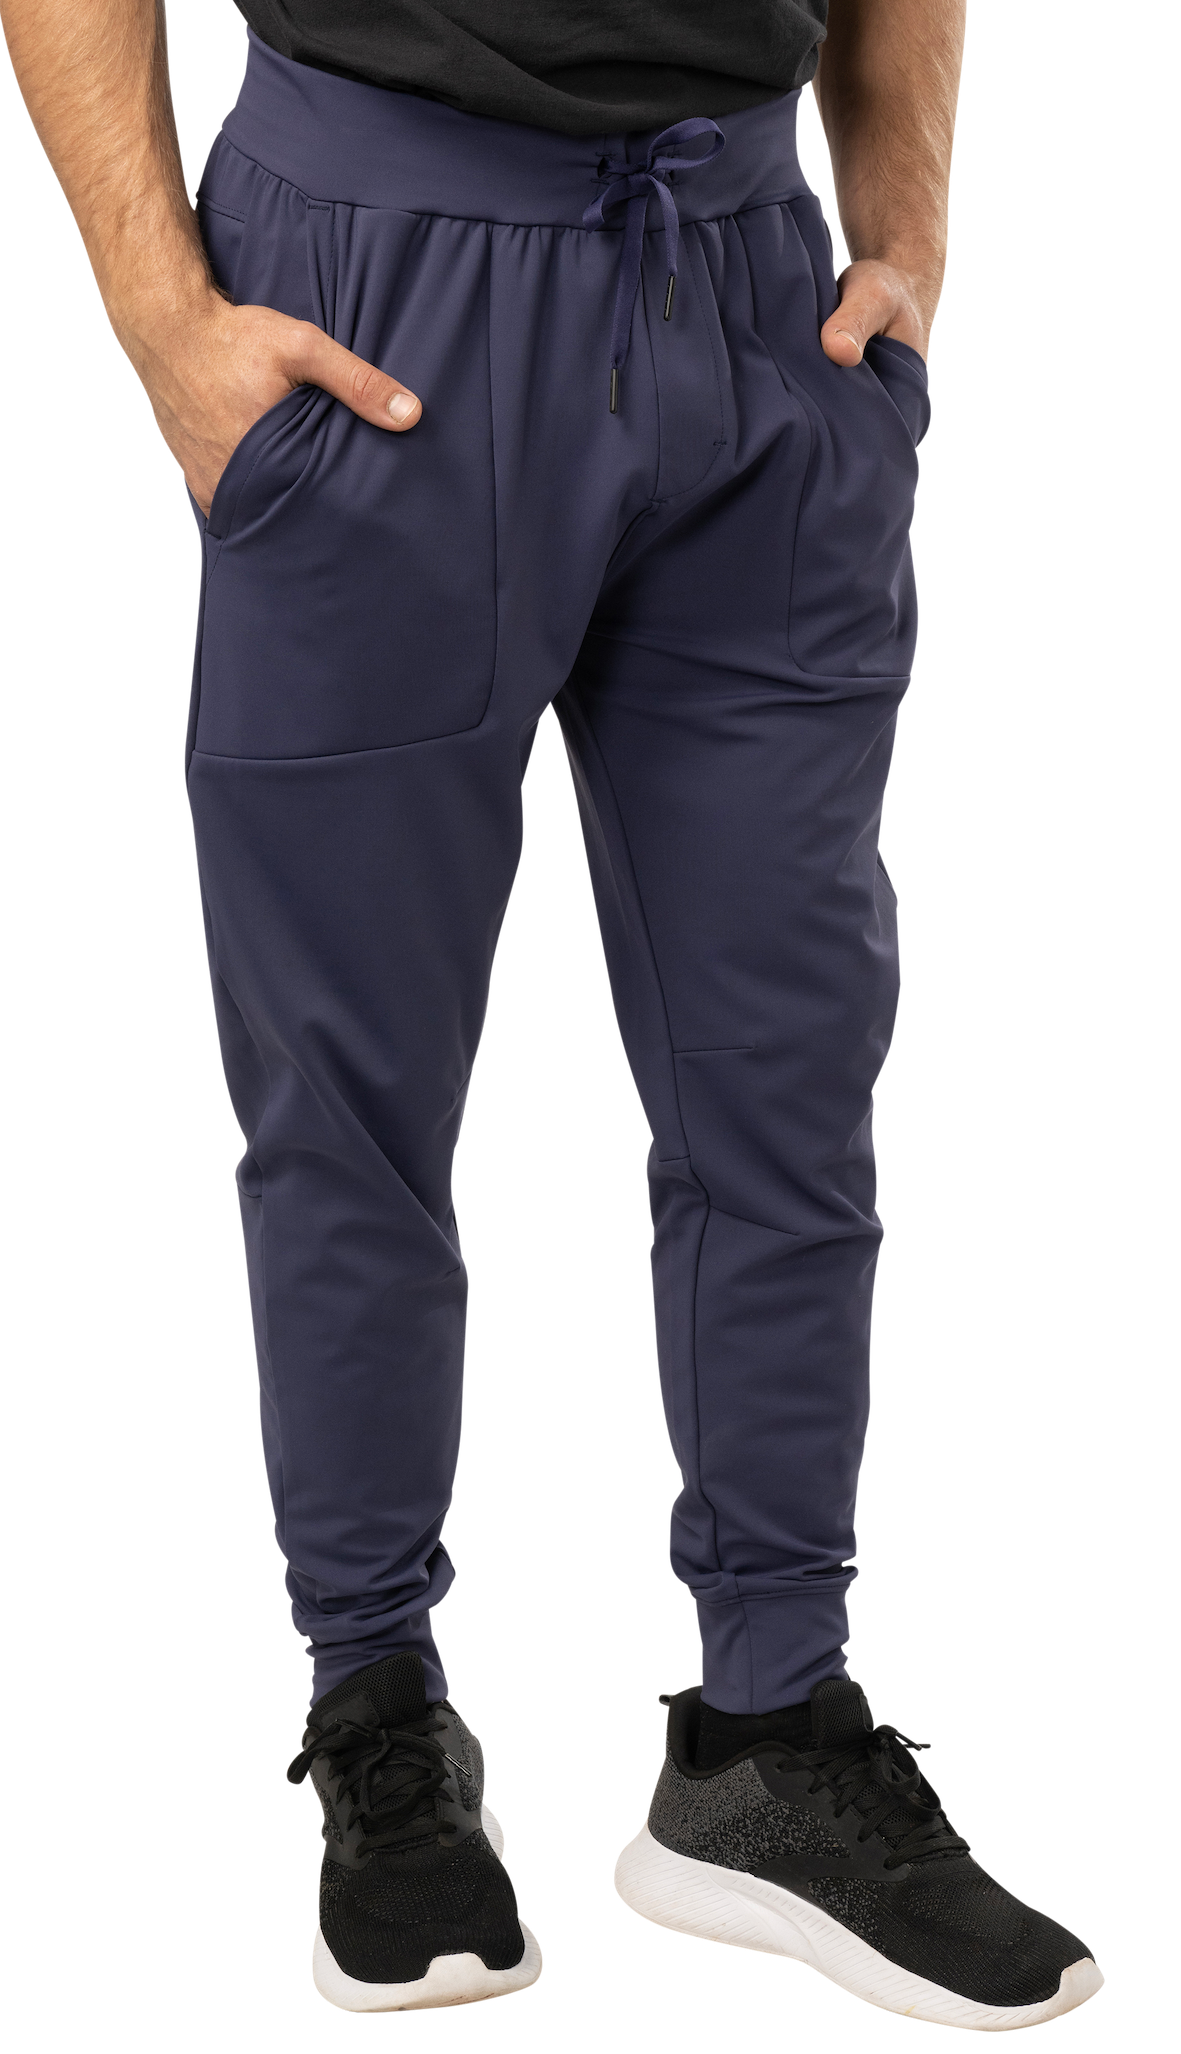 Bauer Fleece Warmth Knit Jogger Adult